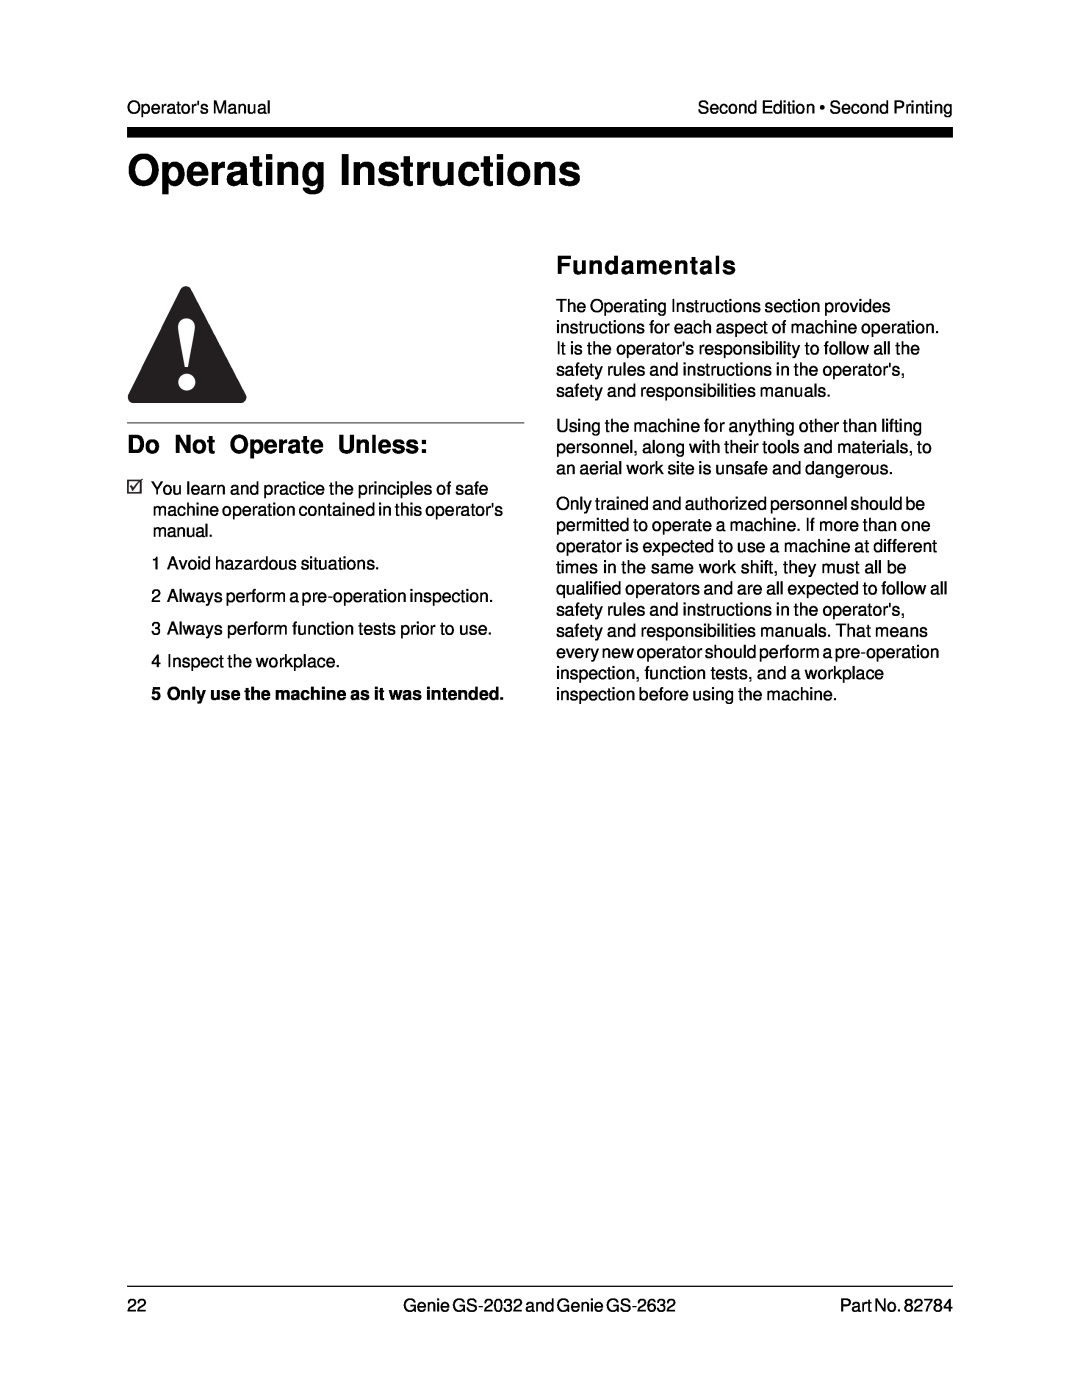 Genie CE, 82784 manual Operating Instructions, 5Only use the machine as it was intended, Do Not Operate Unless, Fundamentals 